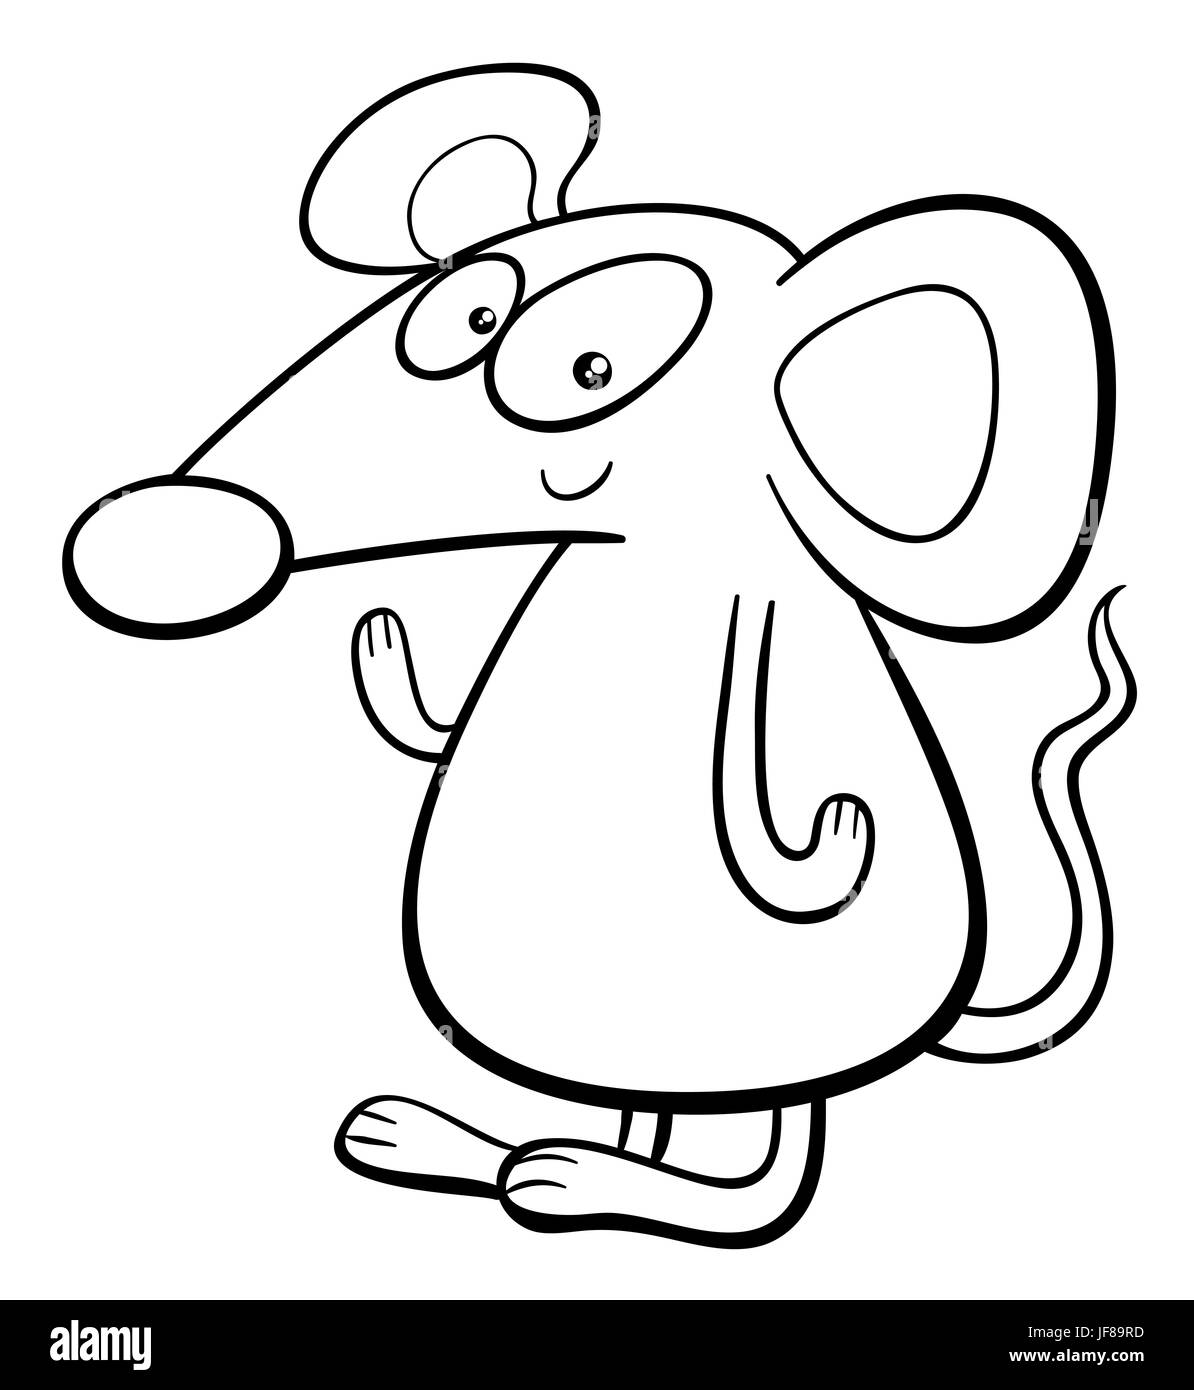 cartoon mouse coloring page Stock Photo